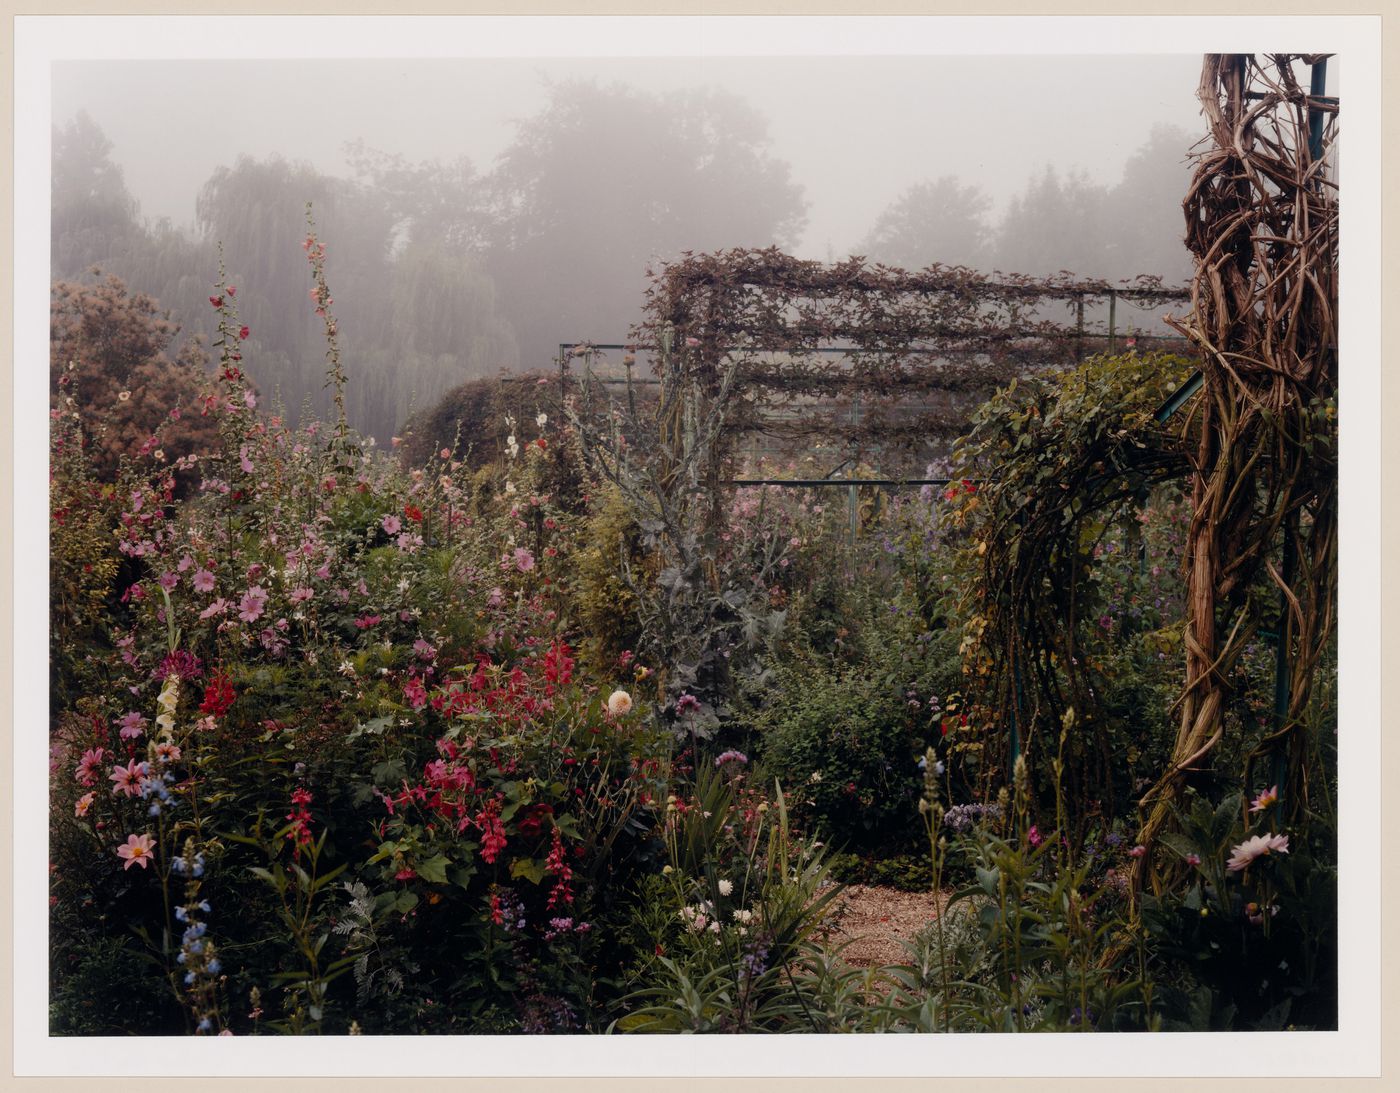 The enclosed Norman garden misted over in the Summer, Monet Gardens, Giverny, France